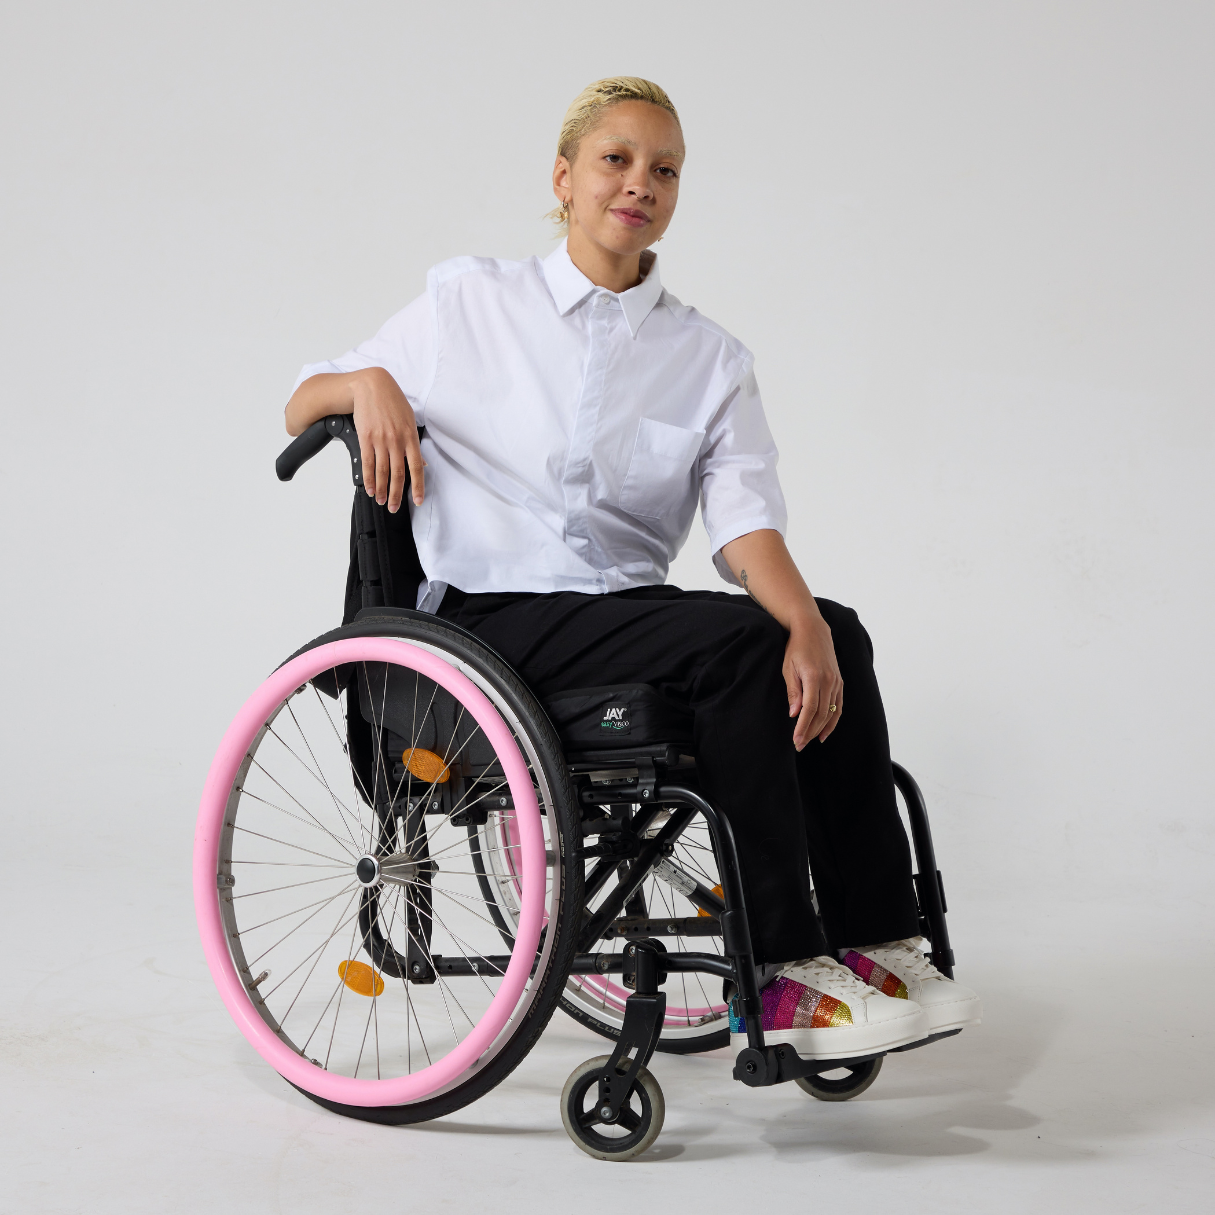 A non-binary model of mixed heritage wears a white short sleeve hi-lo cotton shirt paired with black trousers and shoes with a rainbow patch on them. She is seated in a manual wheelchair with one of her hands resting on the back of the wheelchair while the other hand resting in her lap.